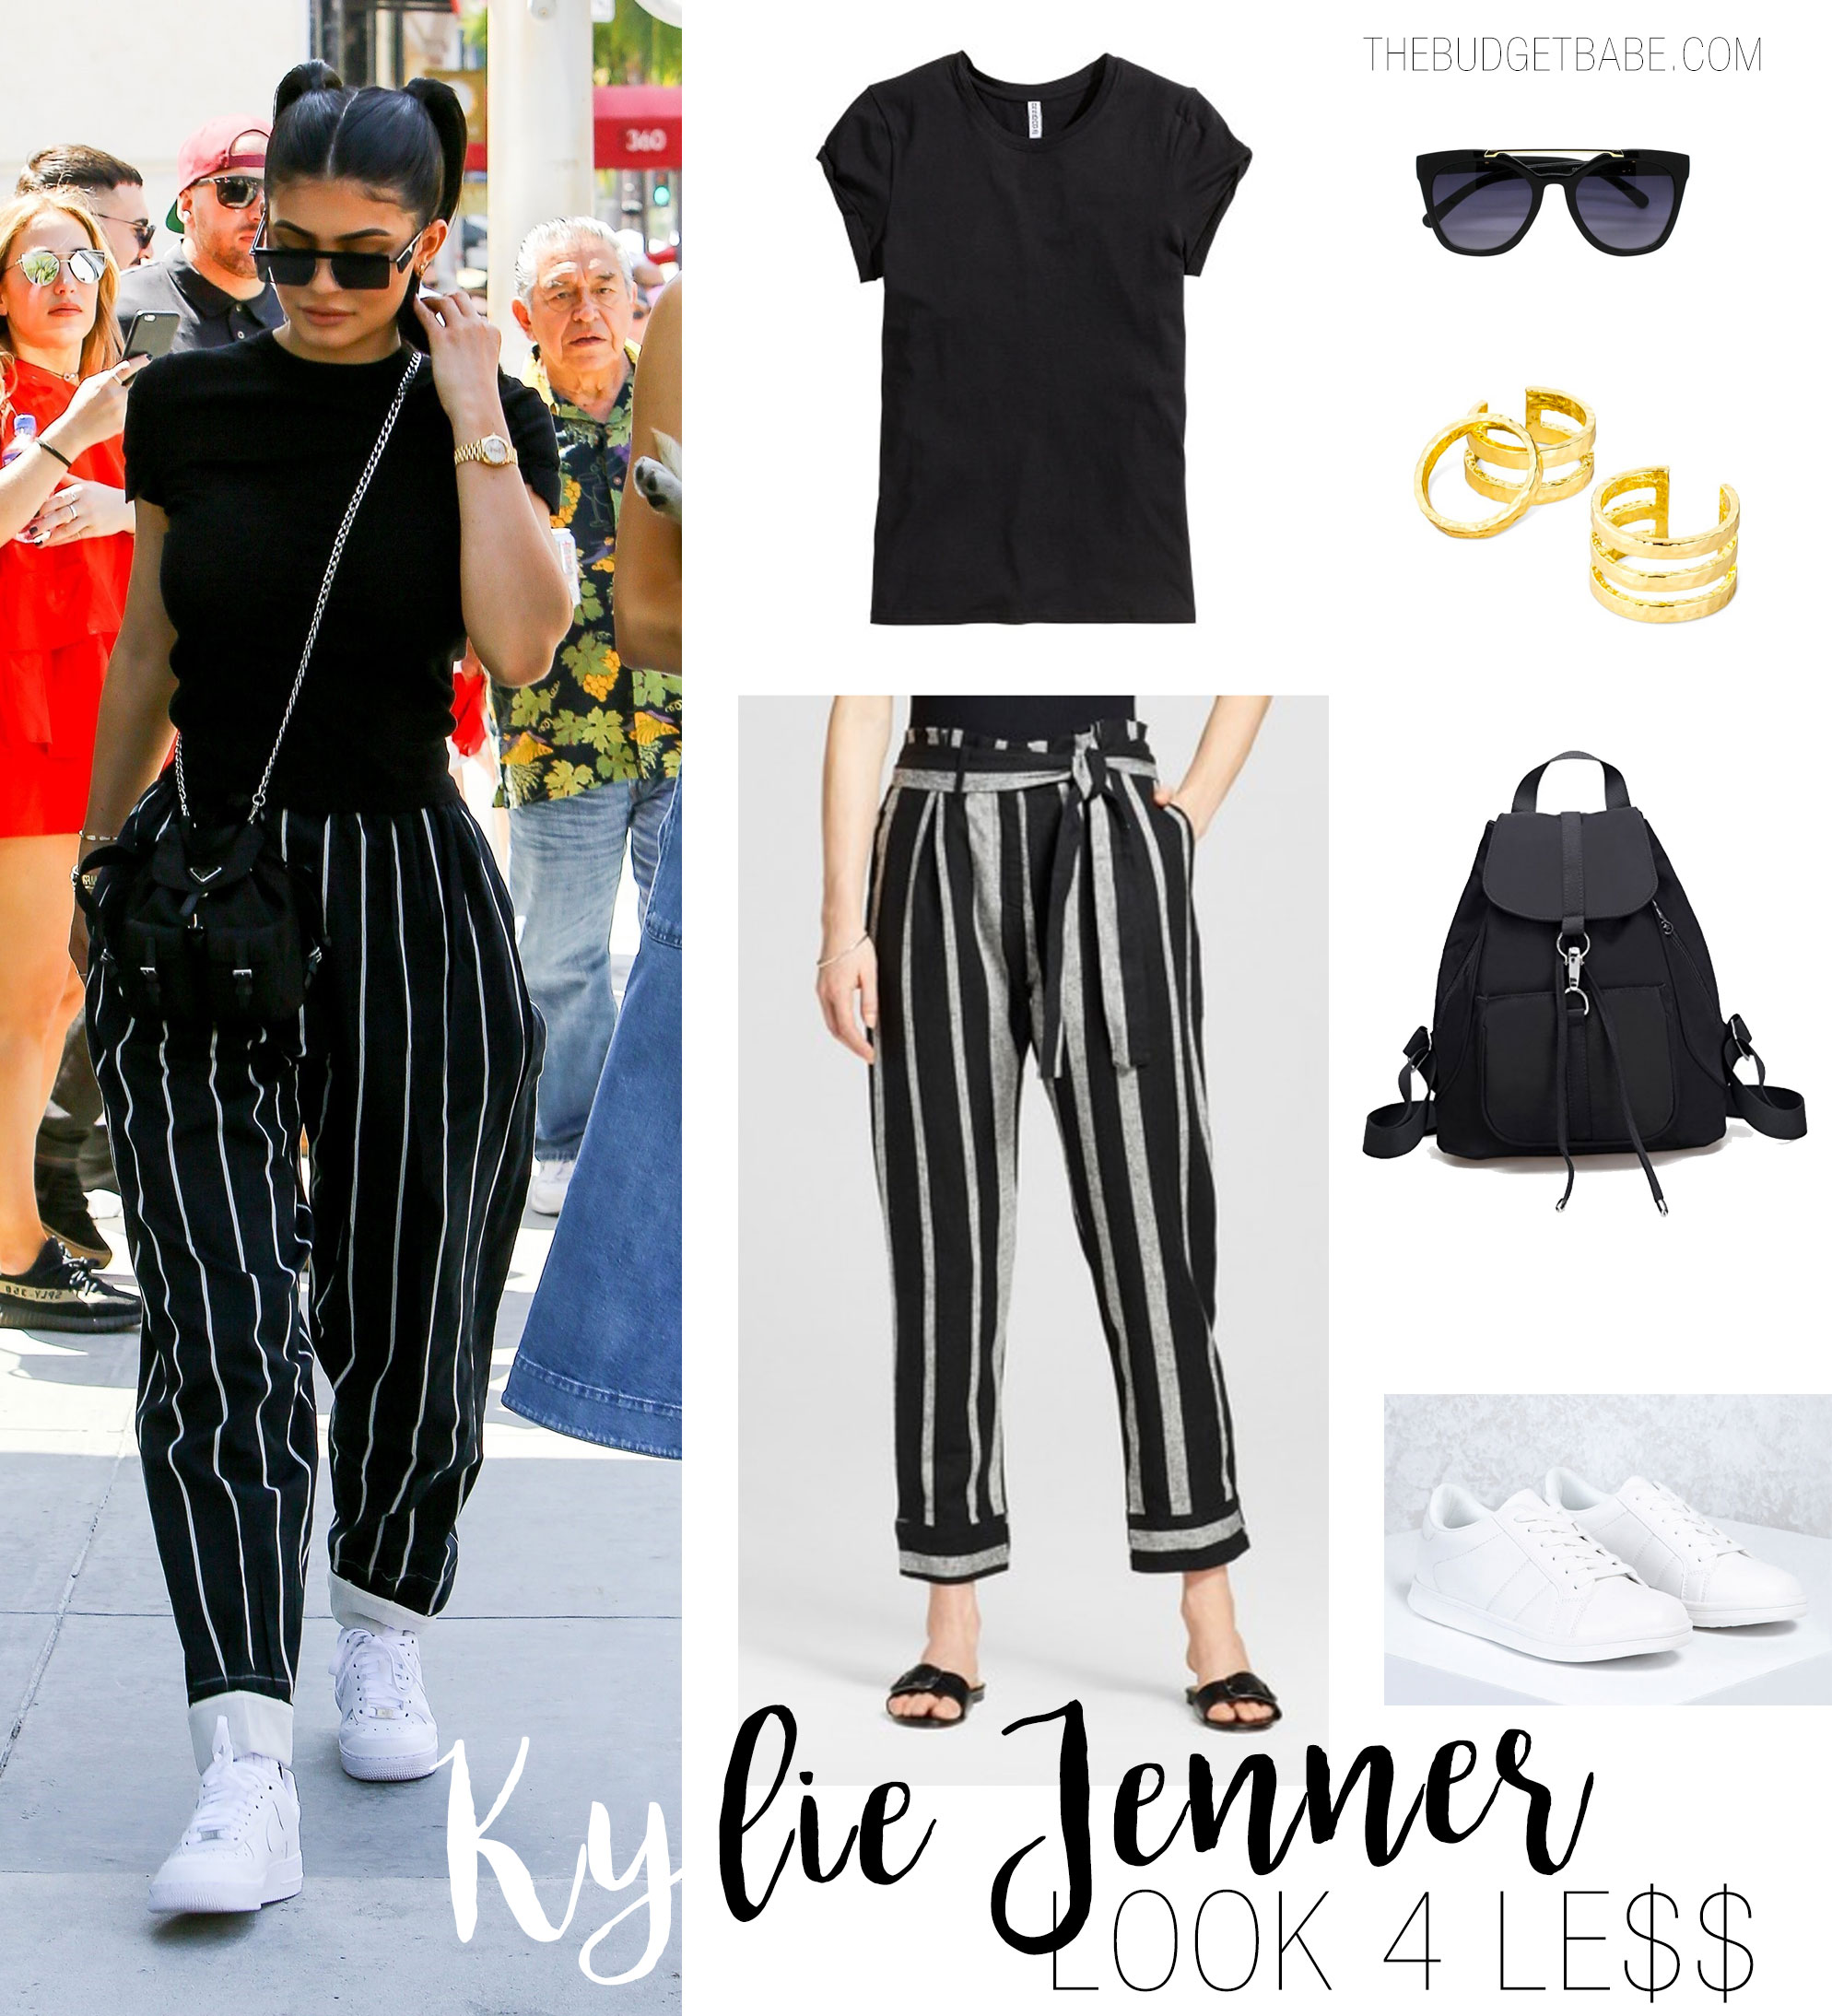 Kylie Jenner wears Celine vertical striped trousers while out and about with sister Kendall on Father's Day.